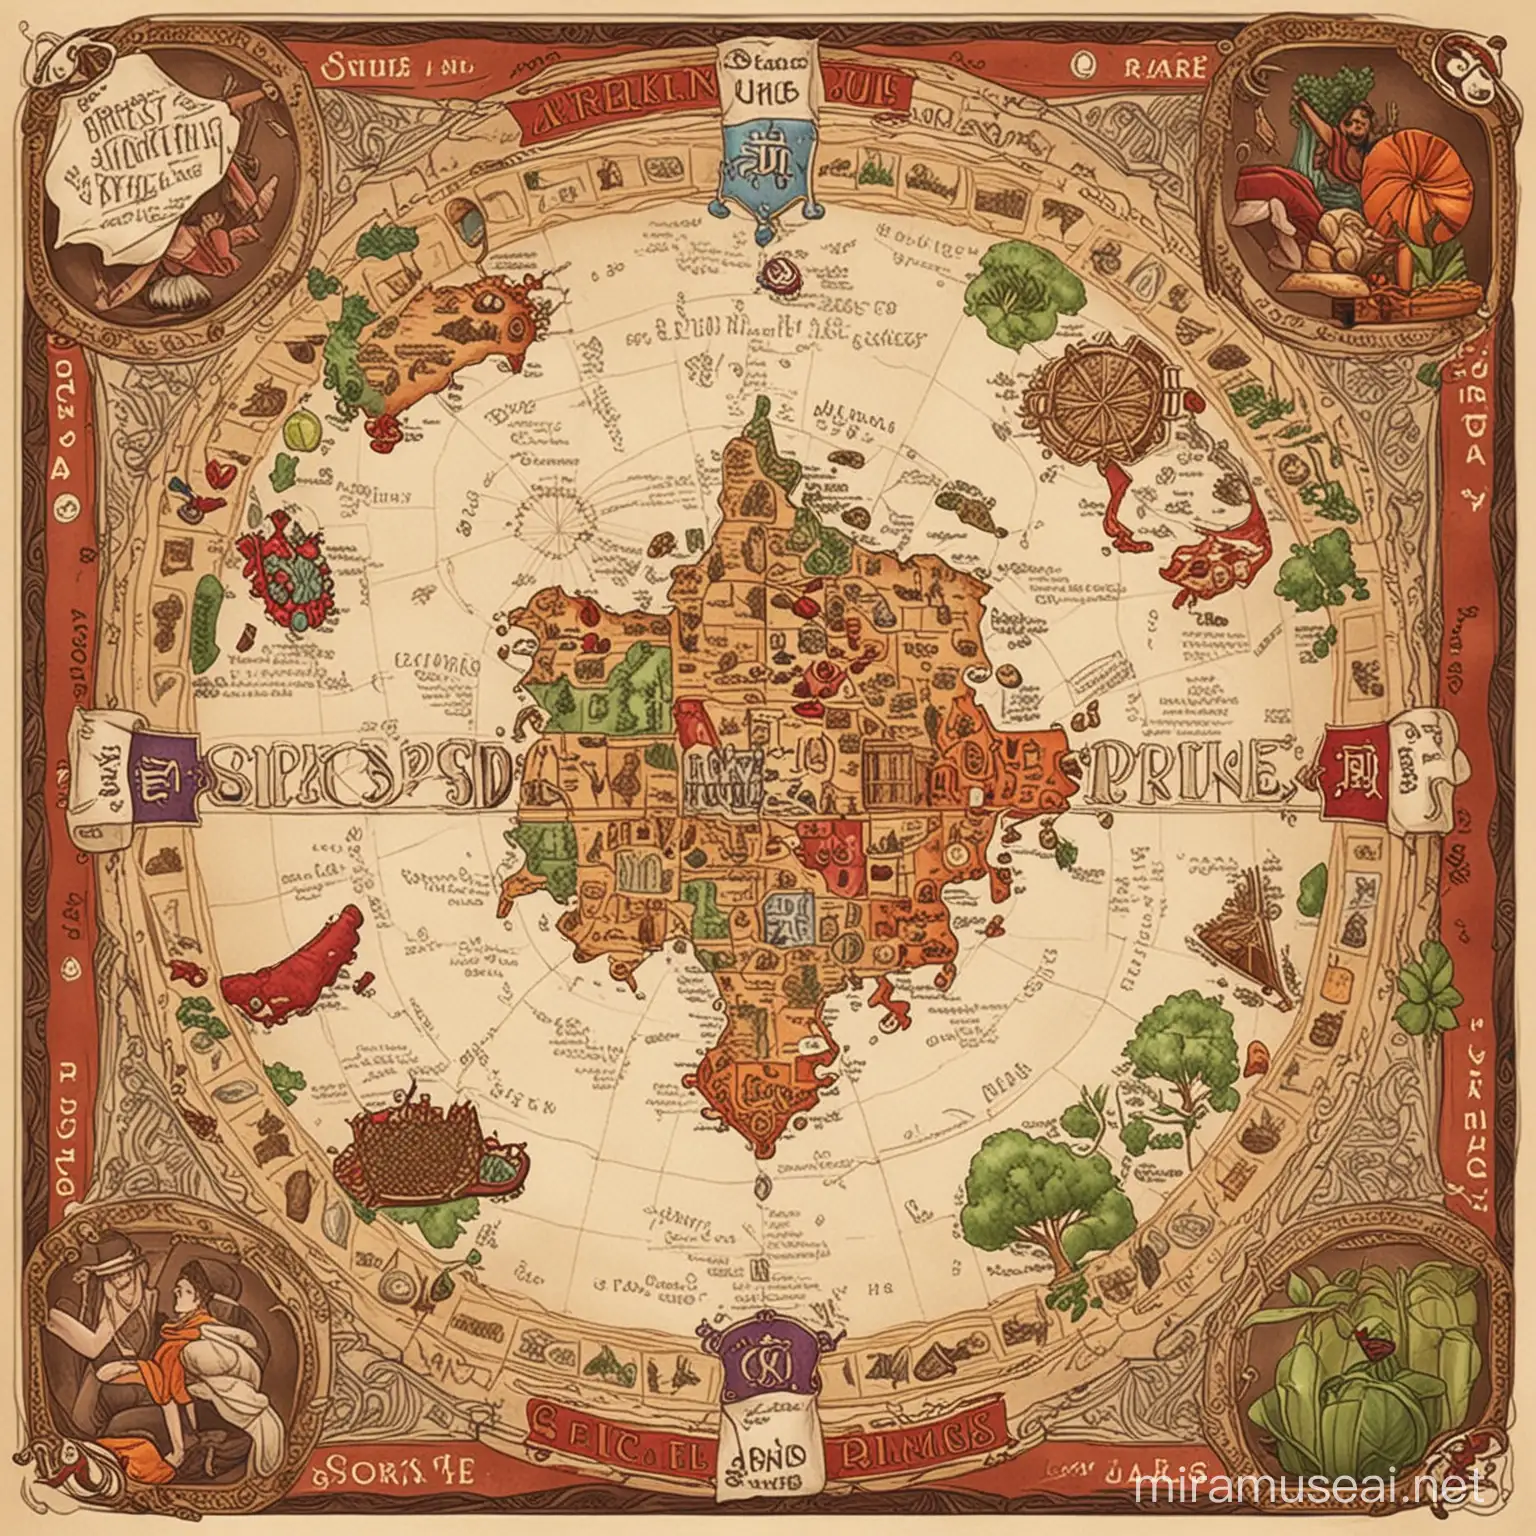 Make this illustration into a board game with four different markets for spice trade game board